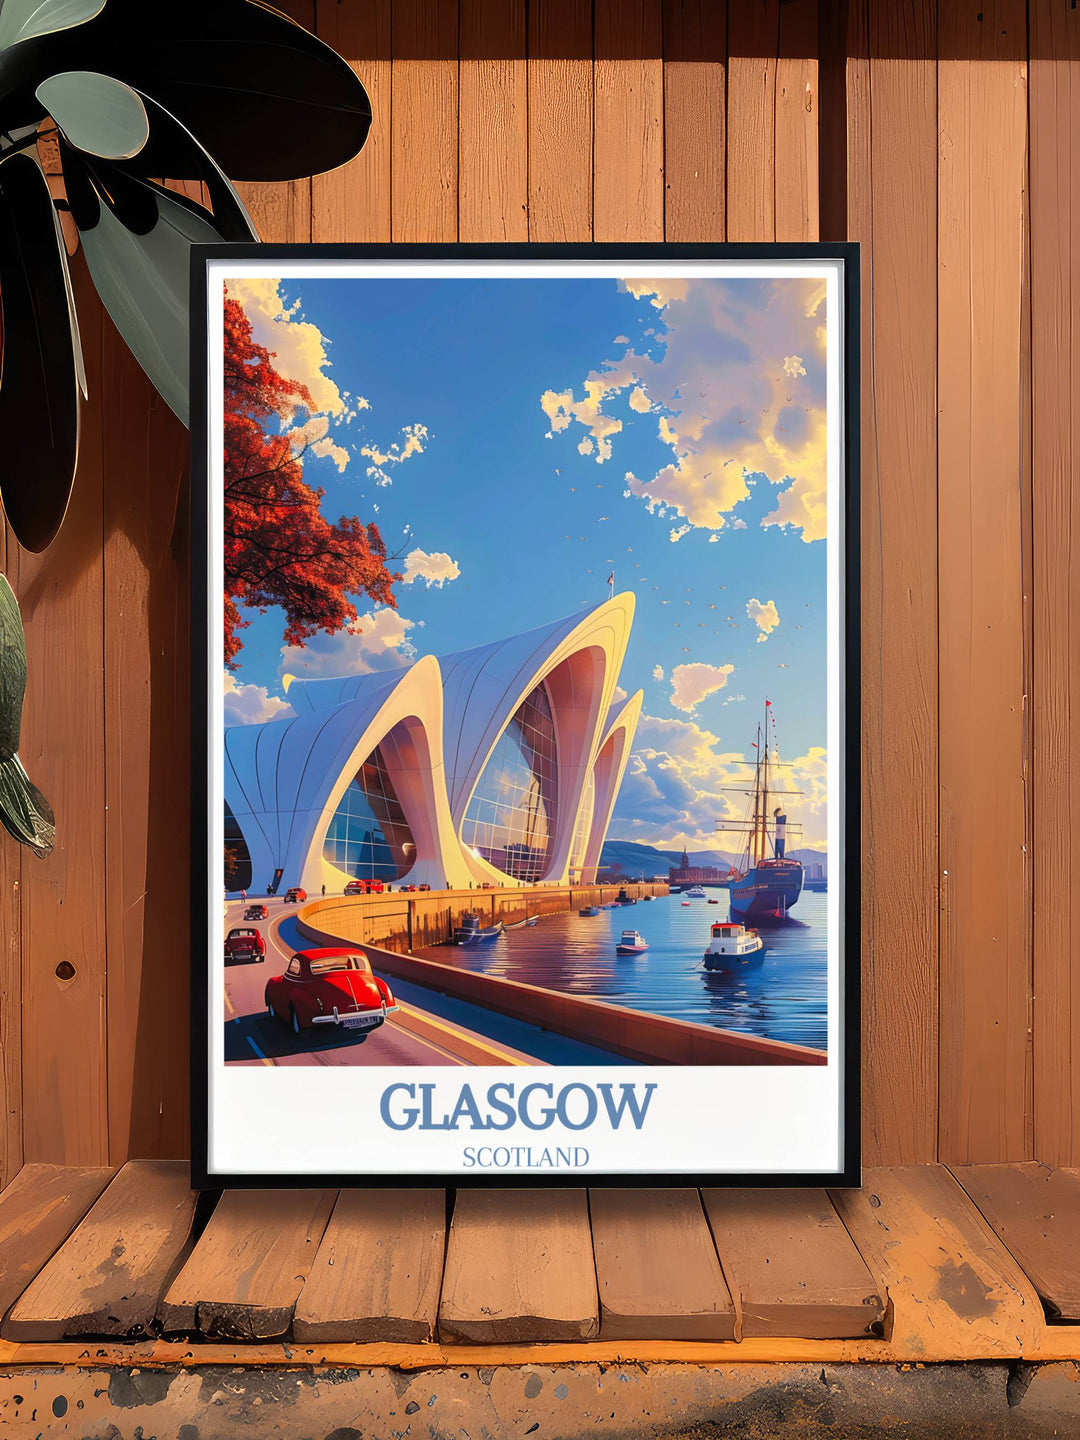 Colorful artwork reflecting Glasgows rich heritage and artistic diversity, awaits, where every piece tells a story of the citys vibrant soul.